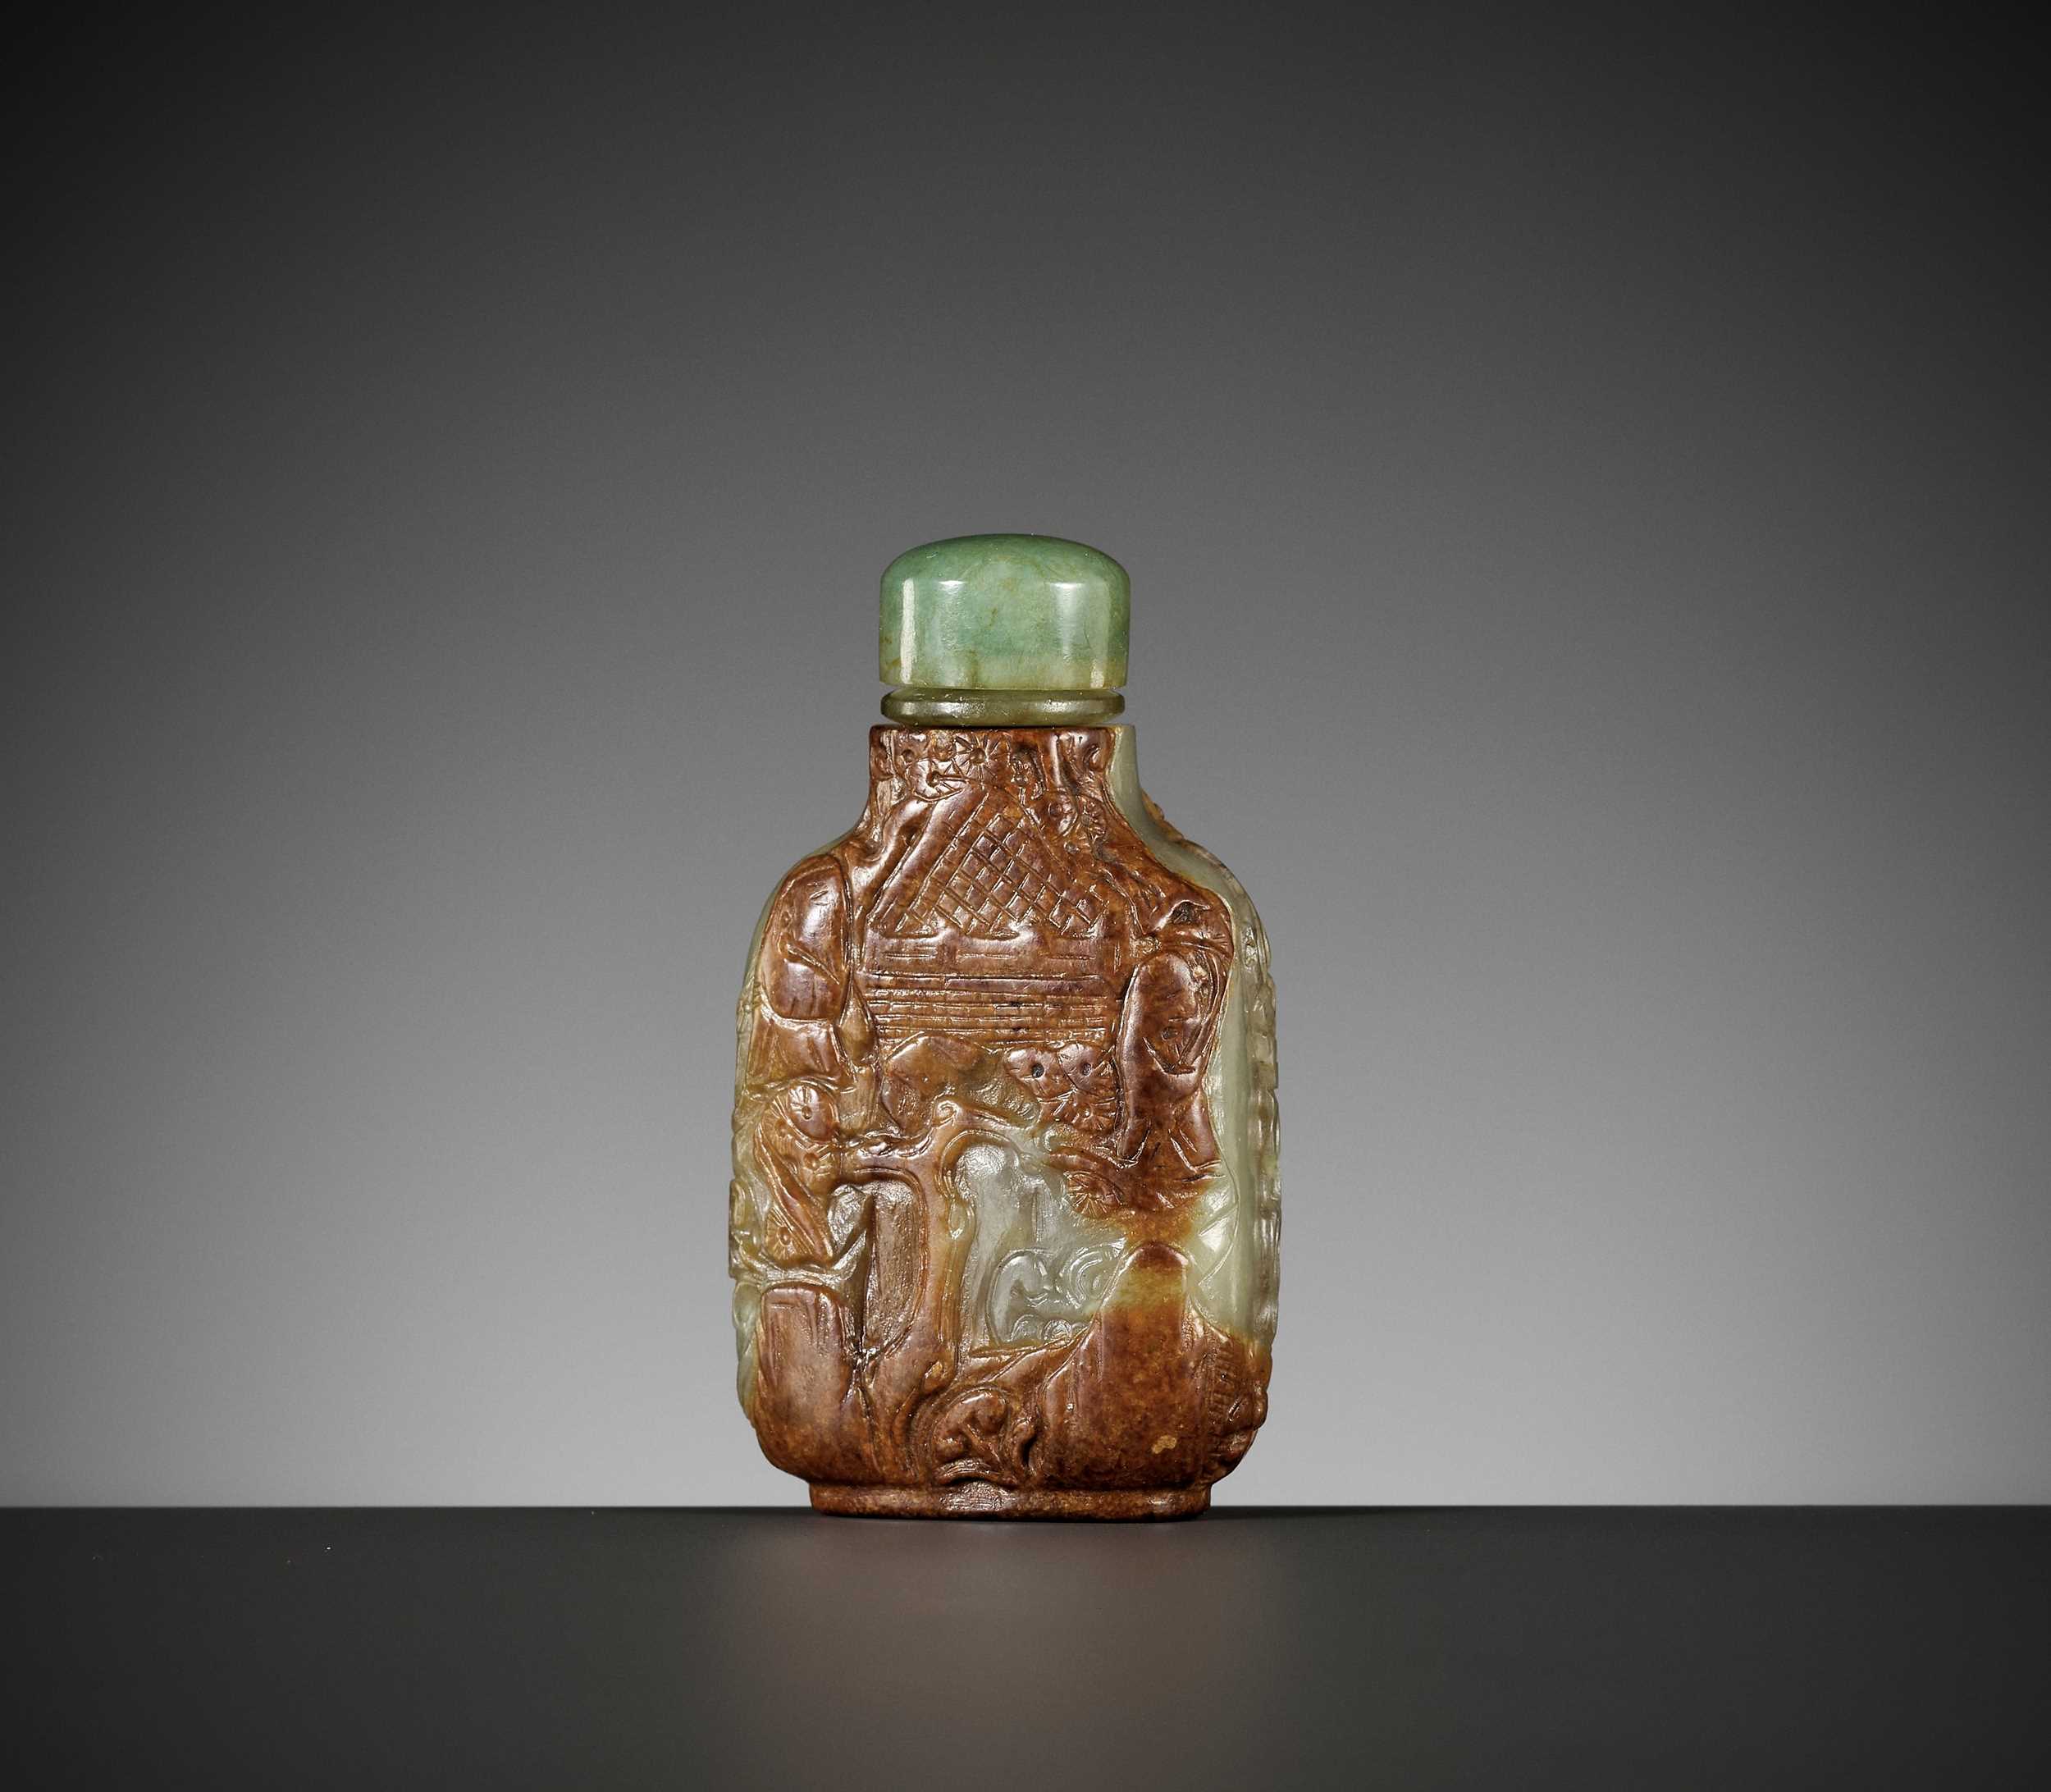 Lot 62 - A CARVED CELADON AND RUSSET JADE SNUFF BOTTLE, MASTER OF THE ROCKS SCHOOL, 1740-1850